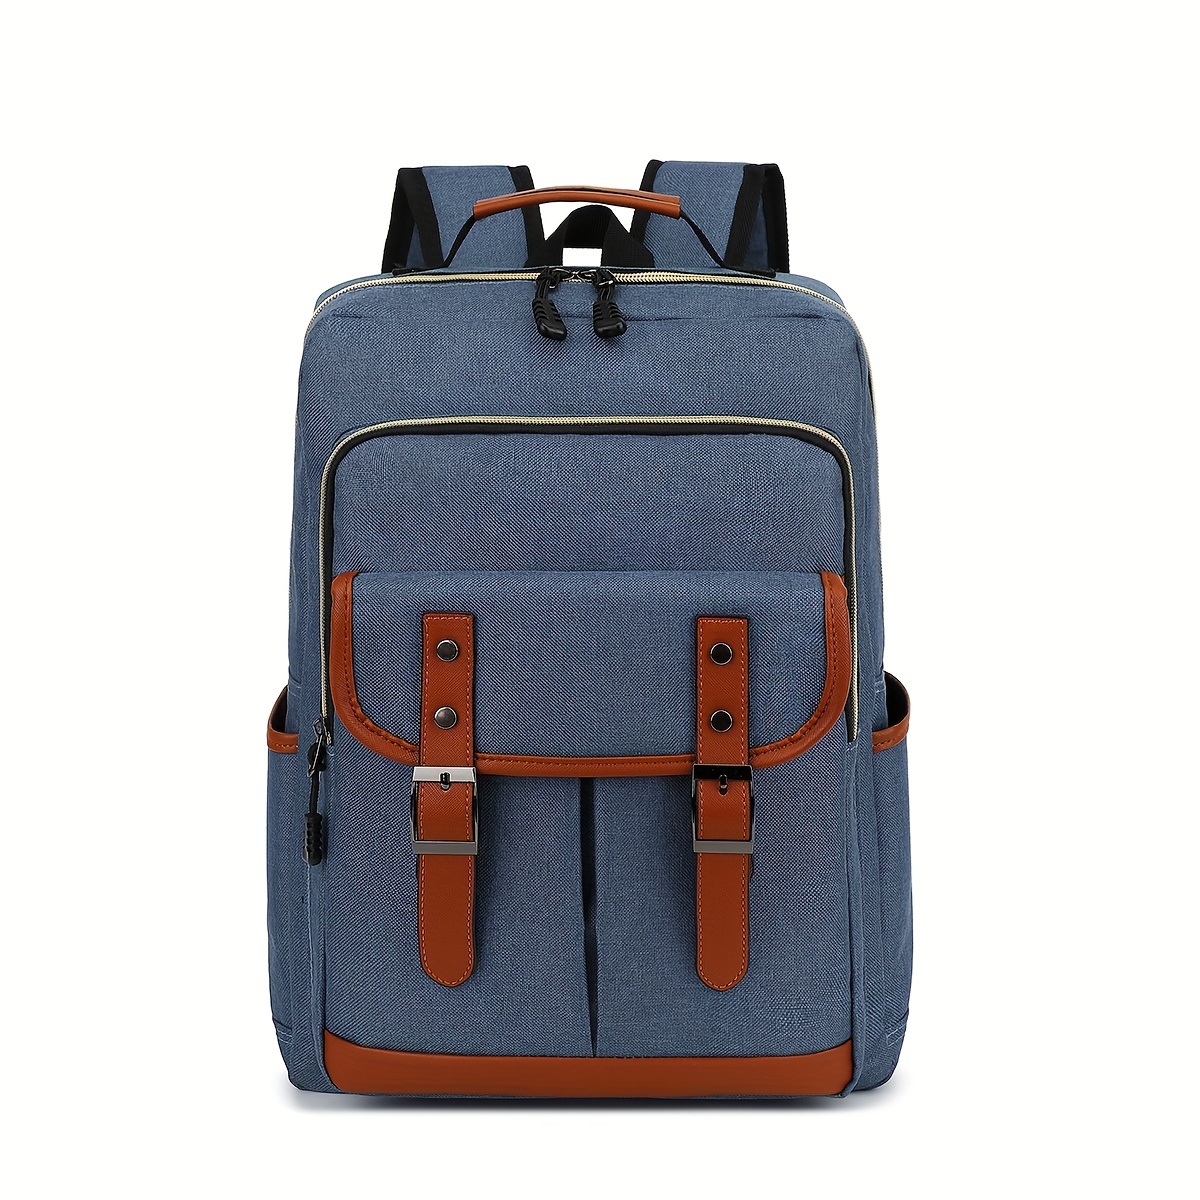 New Travel Leisure Business Backpack, Computer Bag, Multi